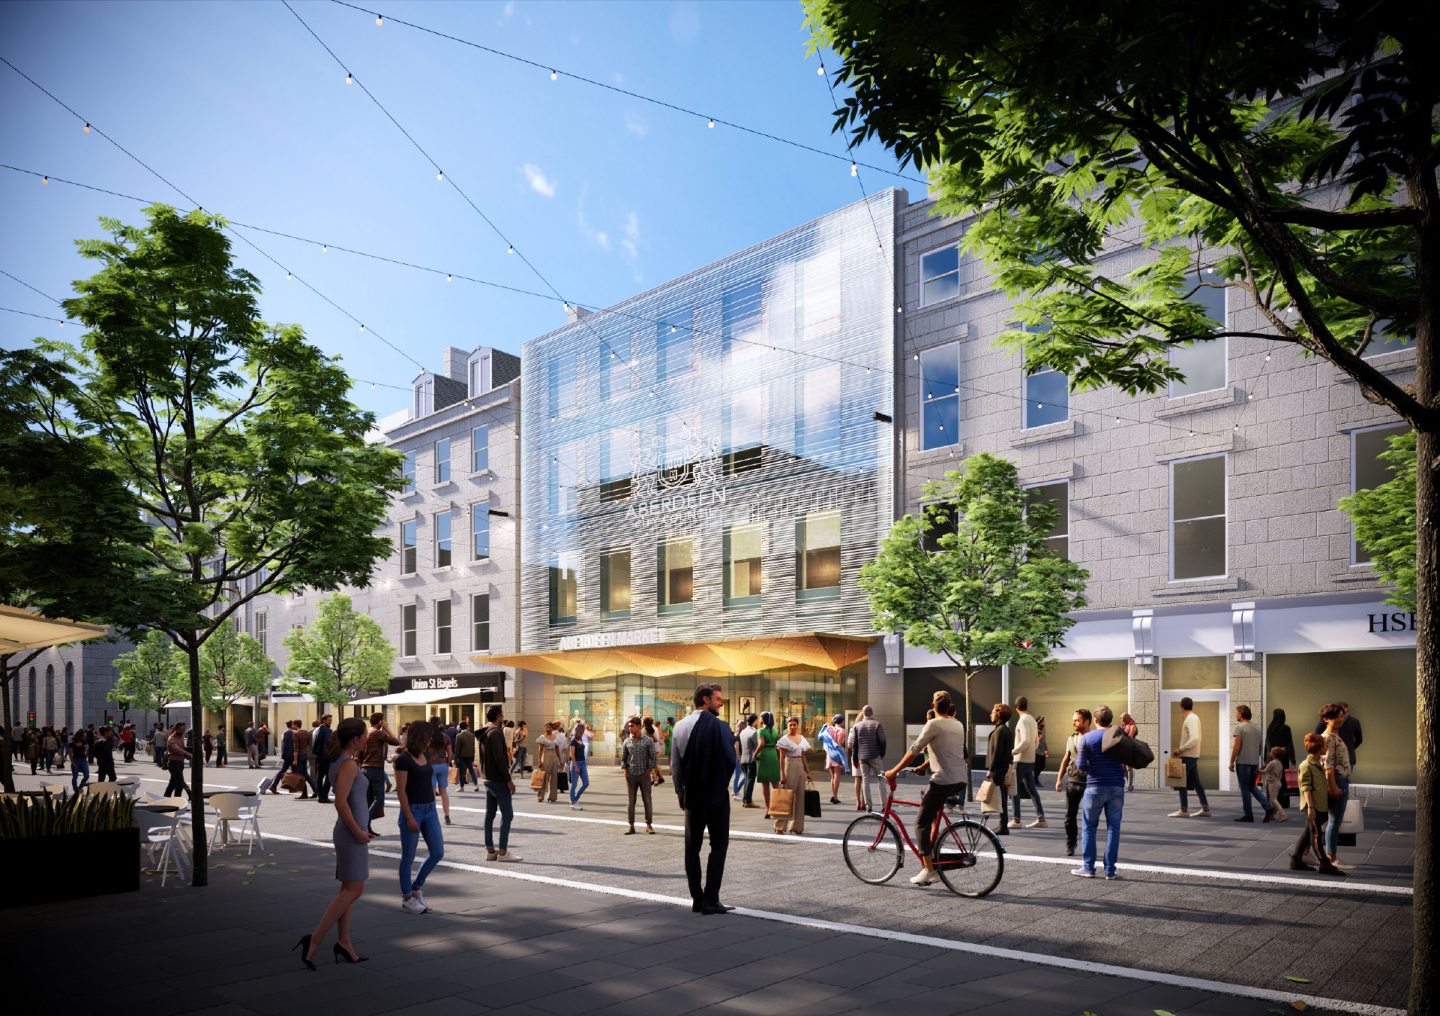 The £50m plans for the former BHS site, a new Aberdeen market. Image: Aberdeen City Council.